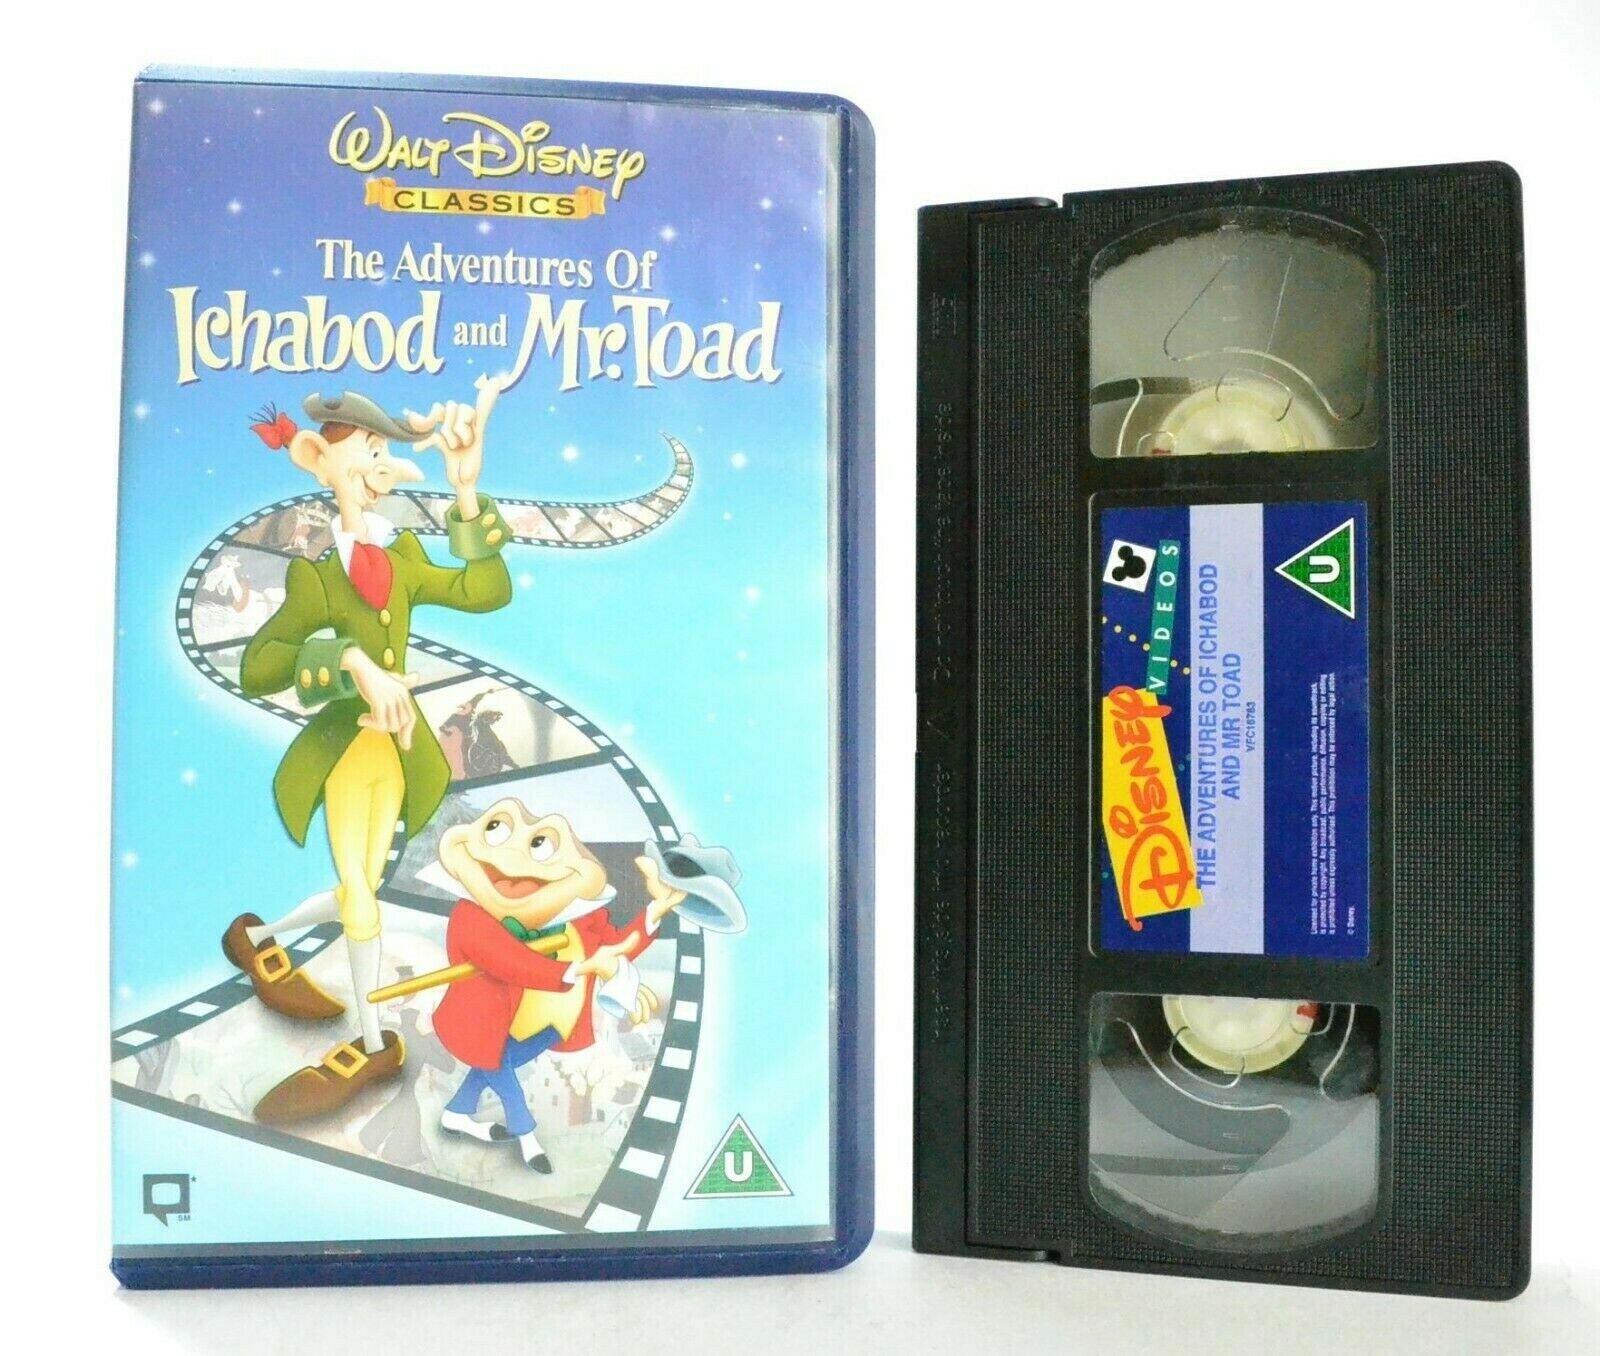 The Adventures Of Ichabod And Mr.Toad, Walt Disney Classic